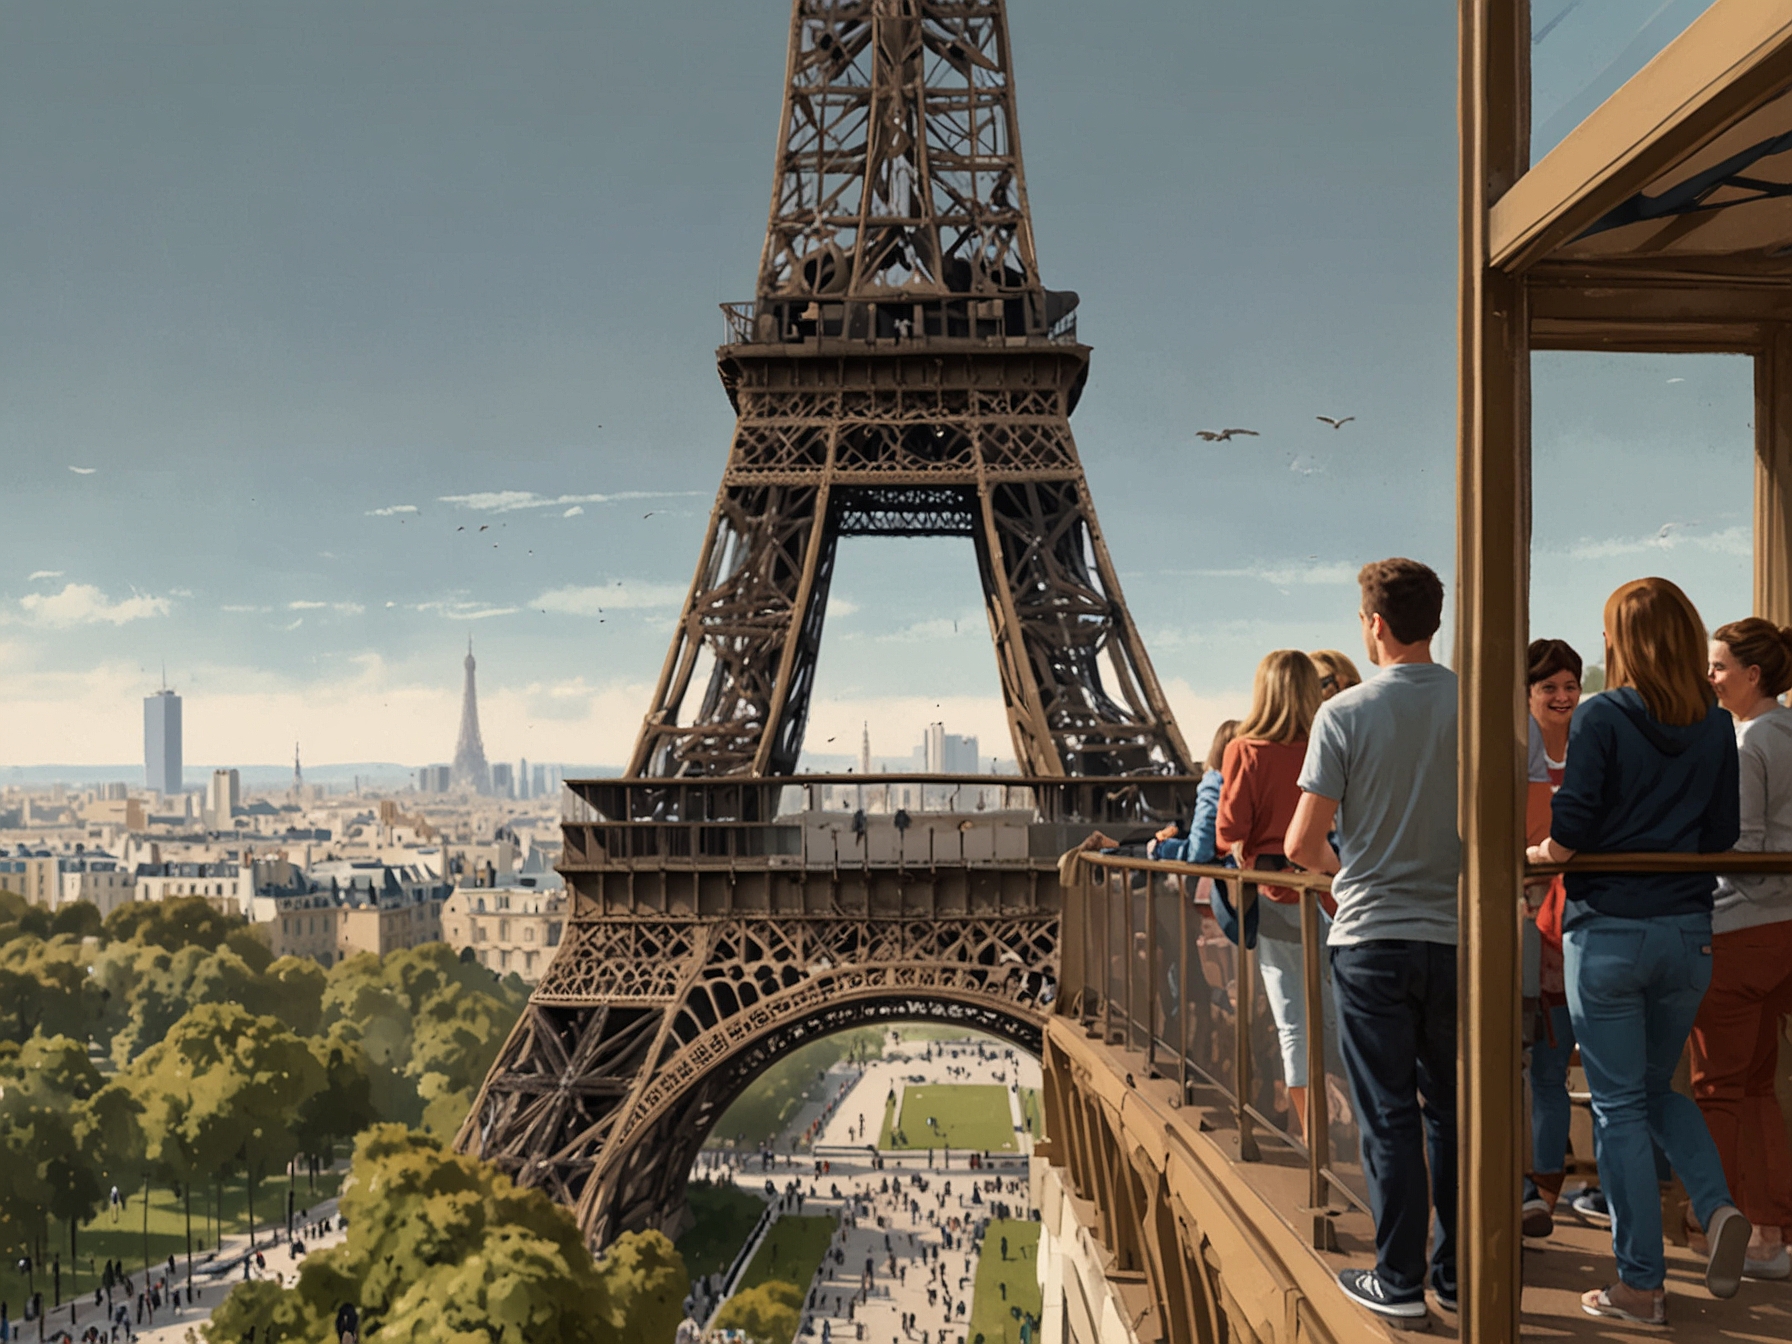 The crowded observation decks of the Eiffel Tower, with tourists jostling for space to catch a glimpse of the Paris skyline, illustrating the lack of personal space.